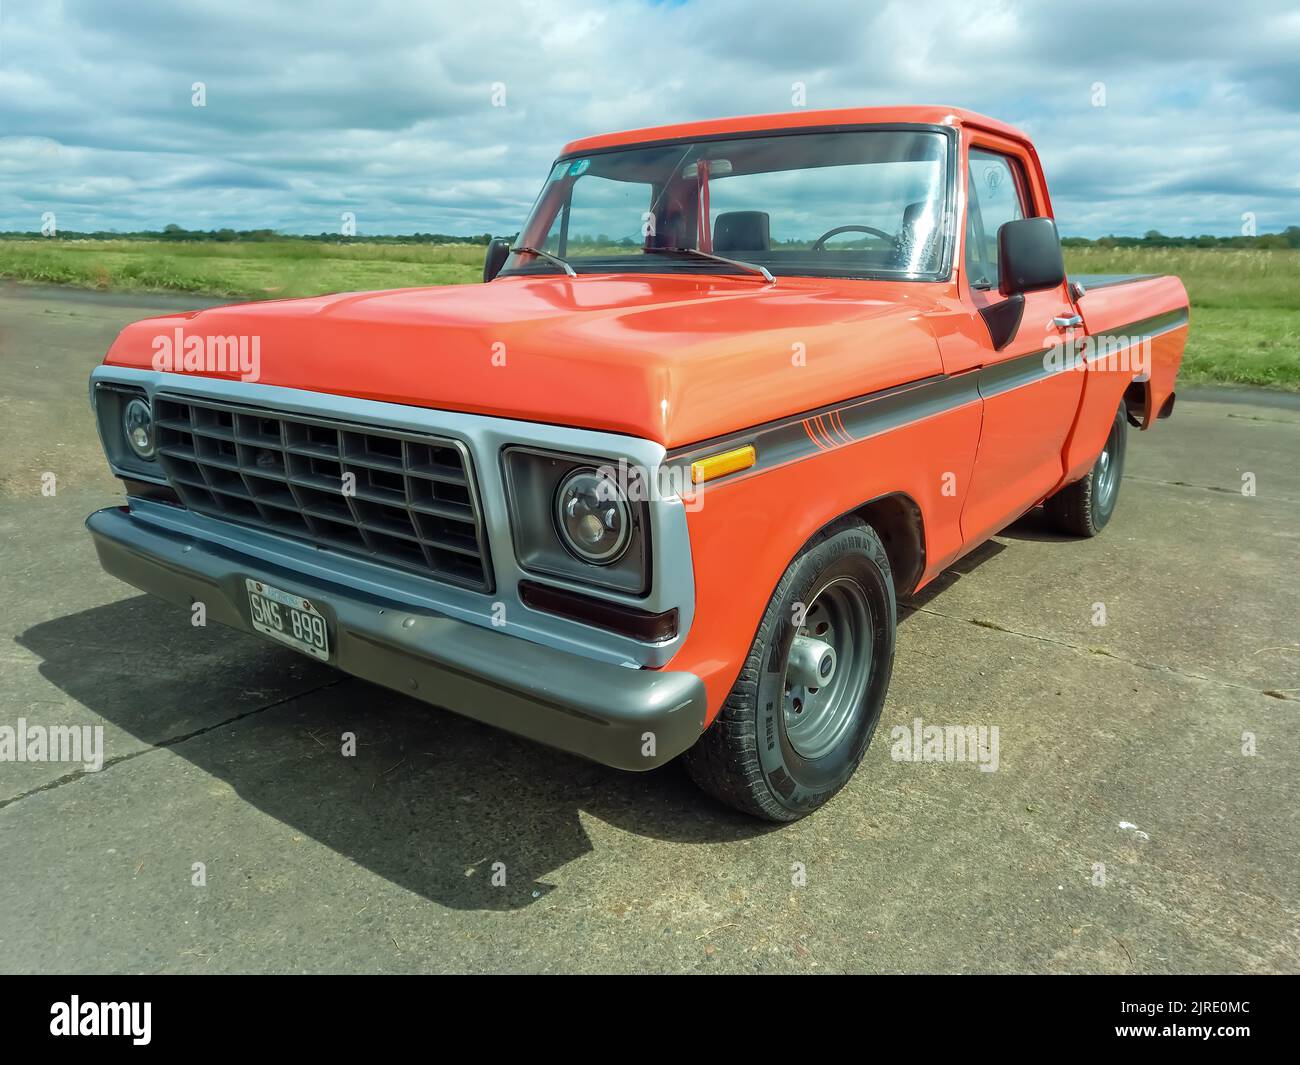 Moron, Argentina - Mar 26, 2022: old orange Chevrolet Chevy C 10 pickup truck 1970s by GM parked on an airstrip. Classic car show. Stock Photo